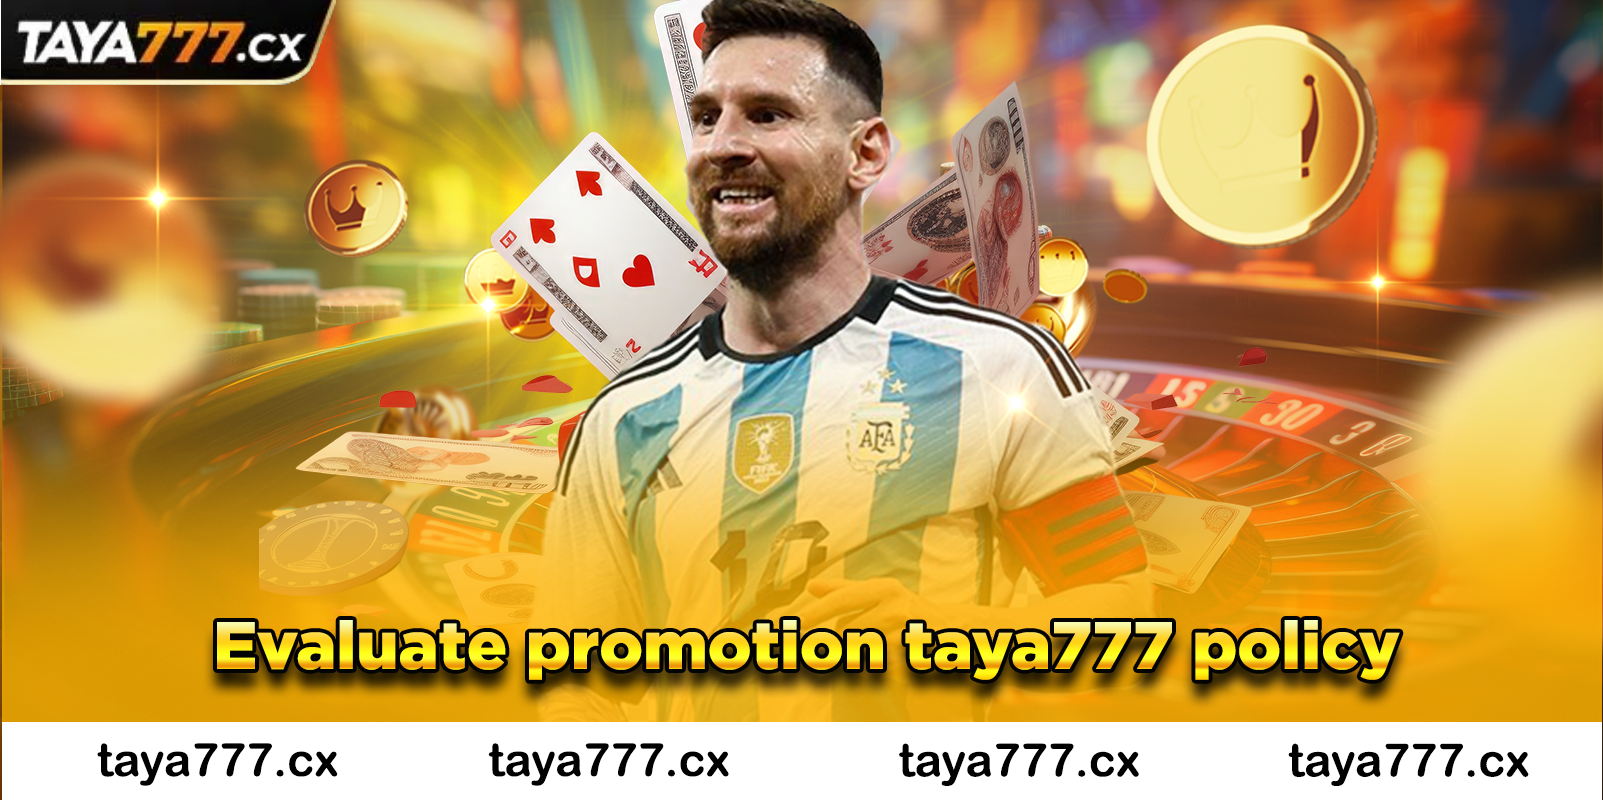 Evaluate promotion taya777 policy